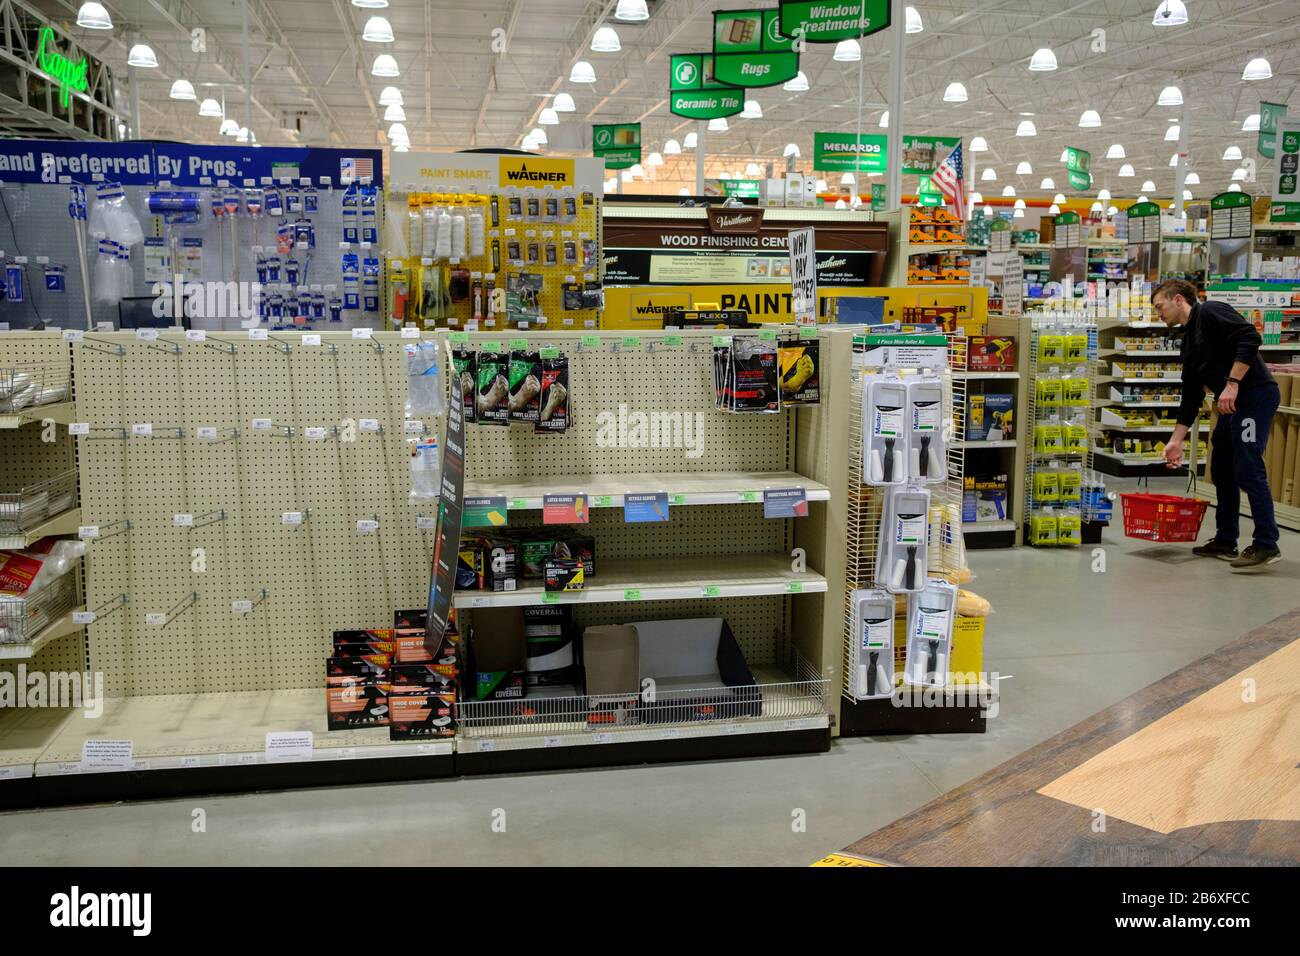 Bloomington United States 11th Mar 2020 View Of Respirator And Glove Shelves Emptied At Menards On The Day World Health Organization Declared Coronavirus To Be A Pandemic Toilet Paper Wipes Protective Breathing Masks